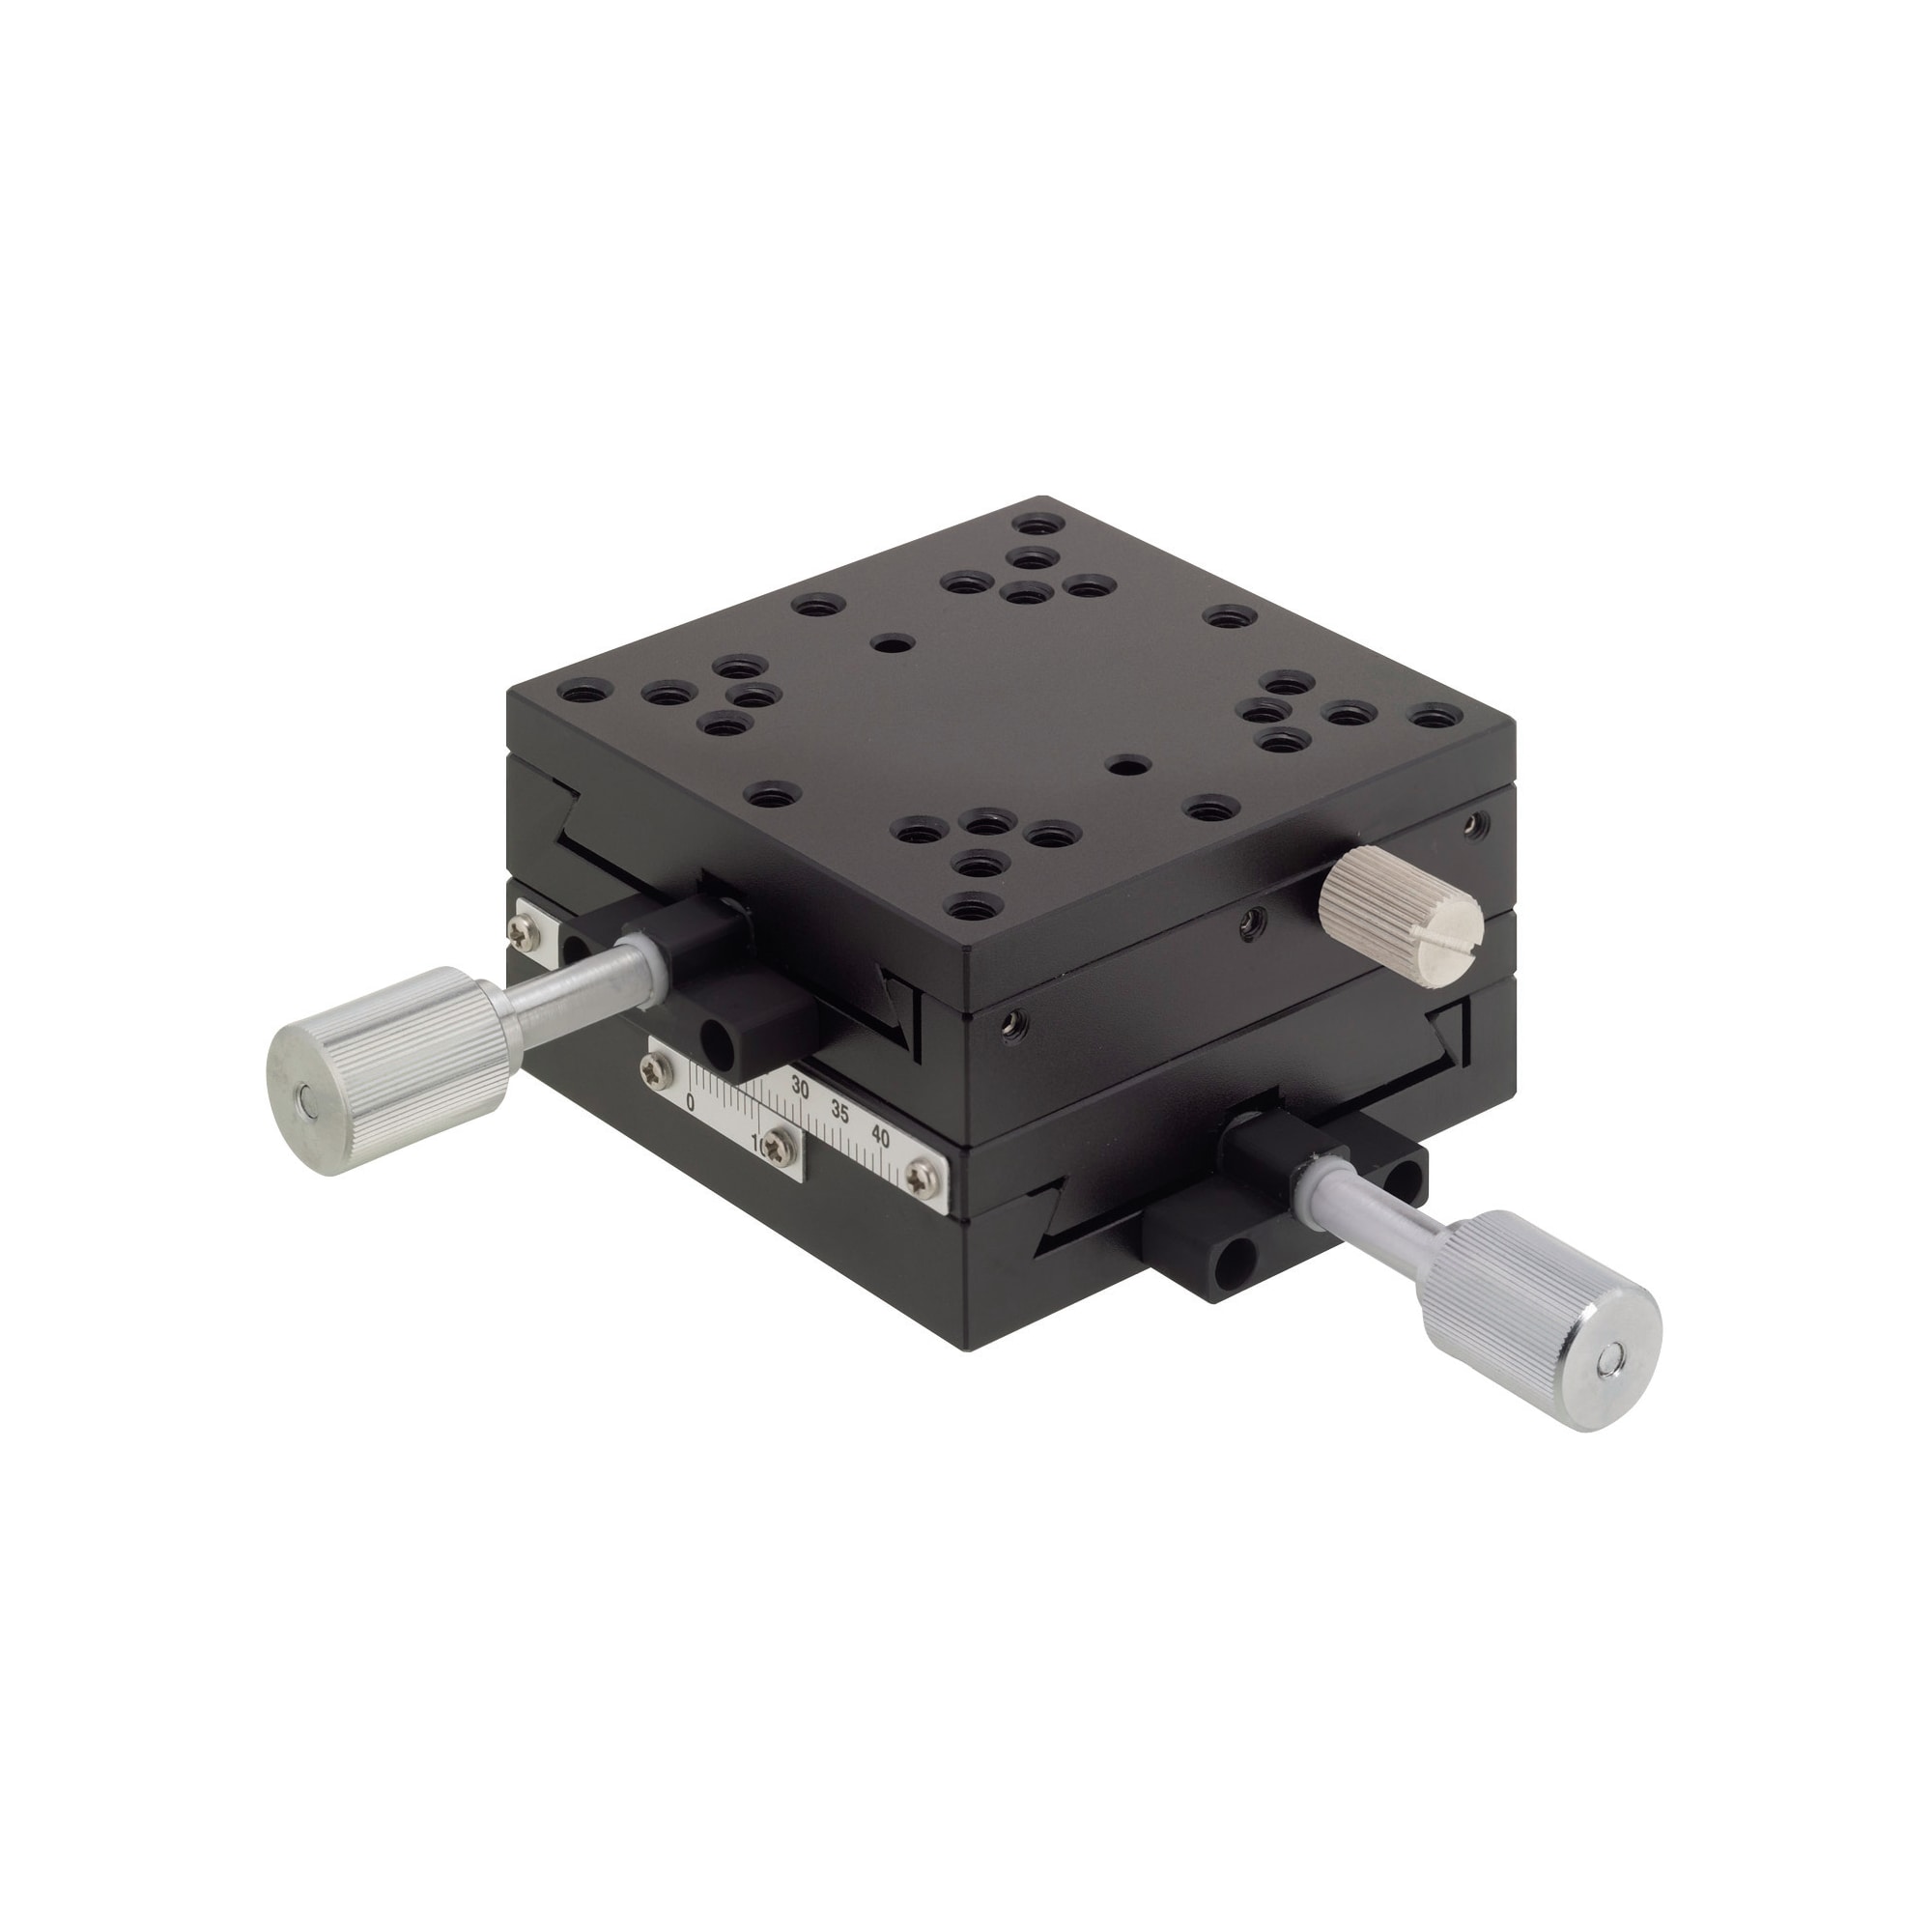 Newport 460PD-XY Peg-Joining 2-Axis Dovetail Linear Stage 